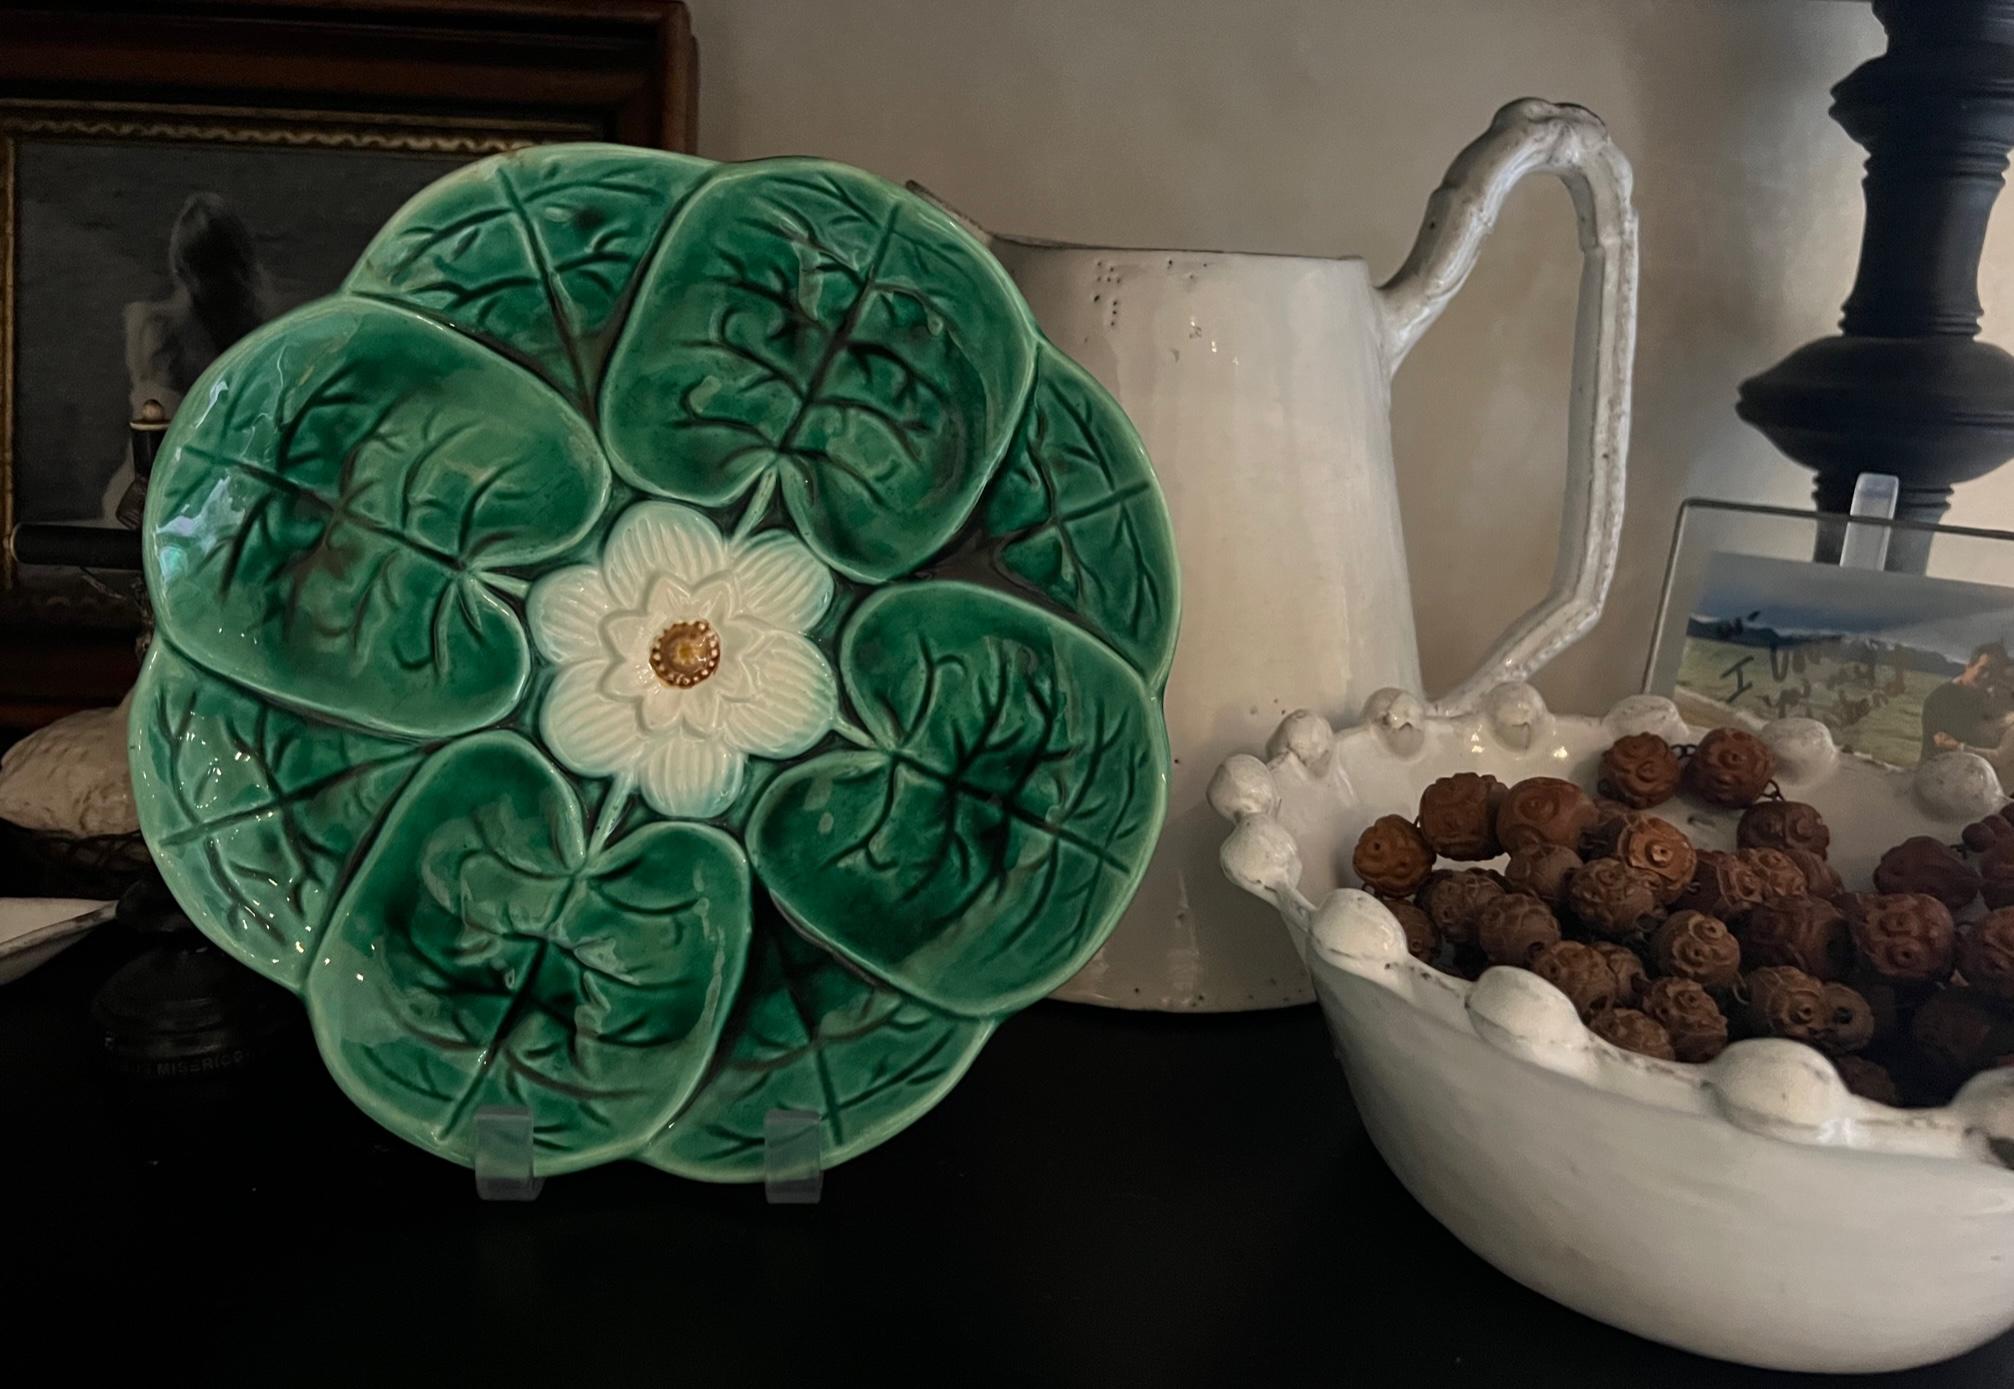 Antique majolica made by Adams and Bromley in the late 19th century. The plate has vibrant green leaves surrounding a central white flower with hints of blue.

This is the larger of the two Adams & Bromley plates in the same pattern, one is 8 inches